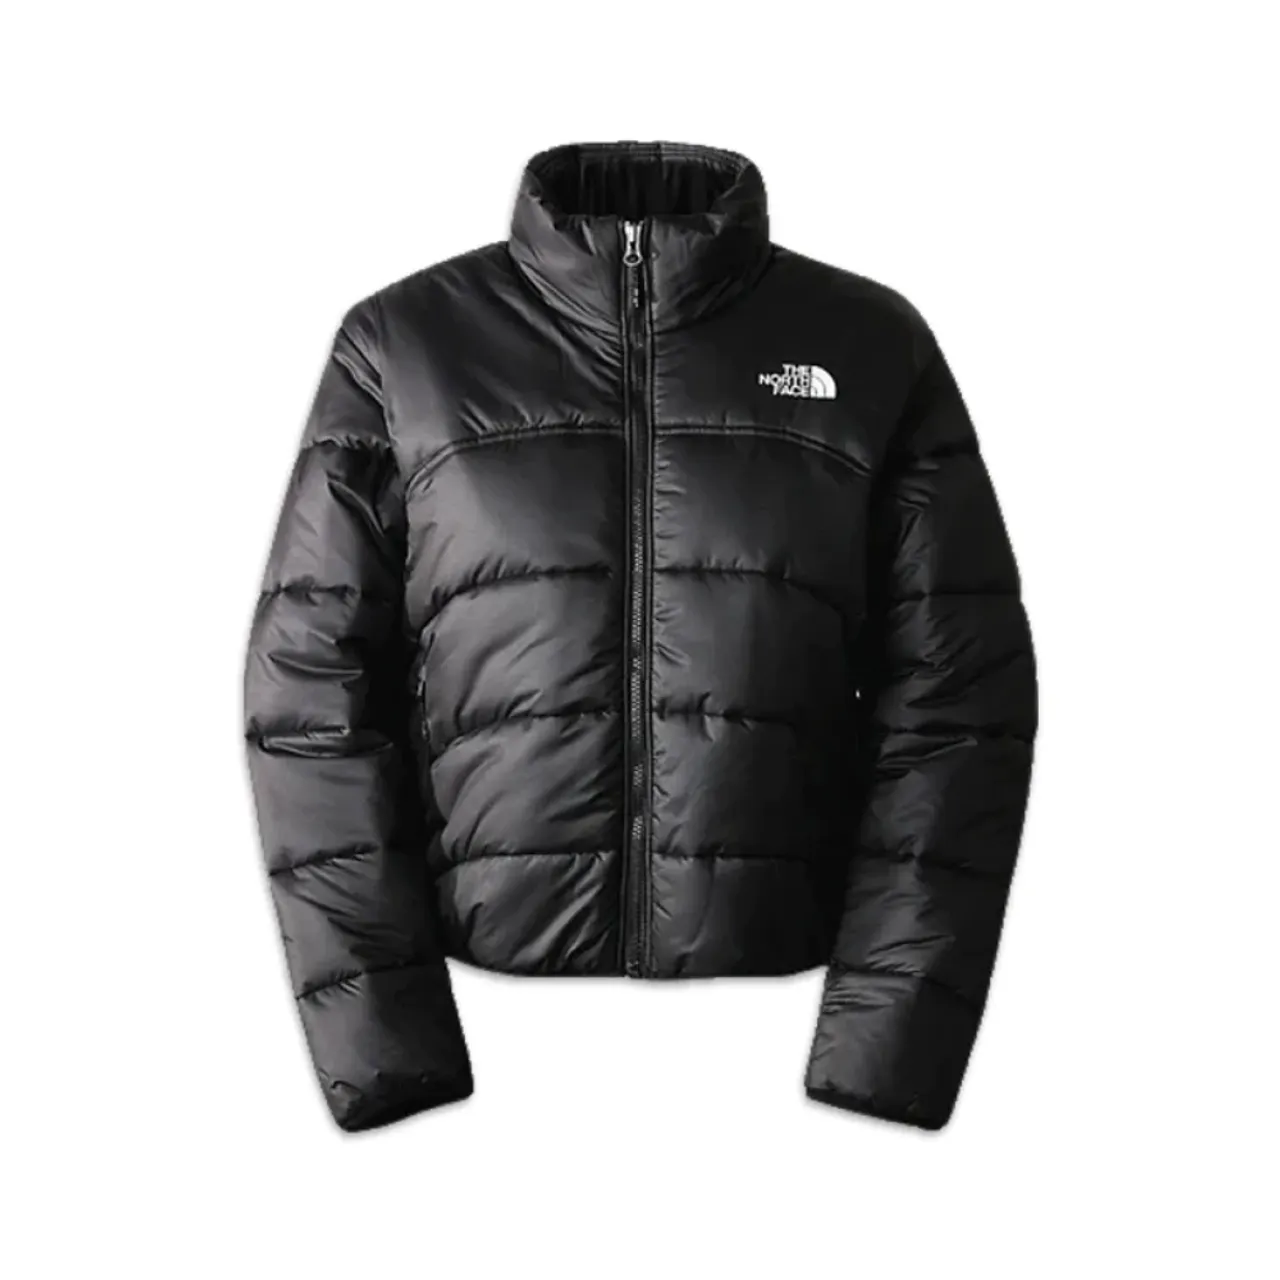 The North Face , 2000 TNF Jacket for Women ,Black female, Sizes: